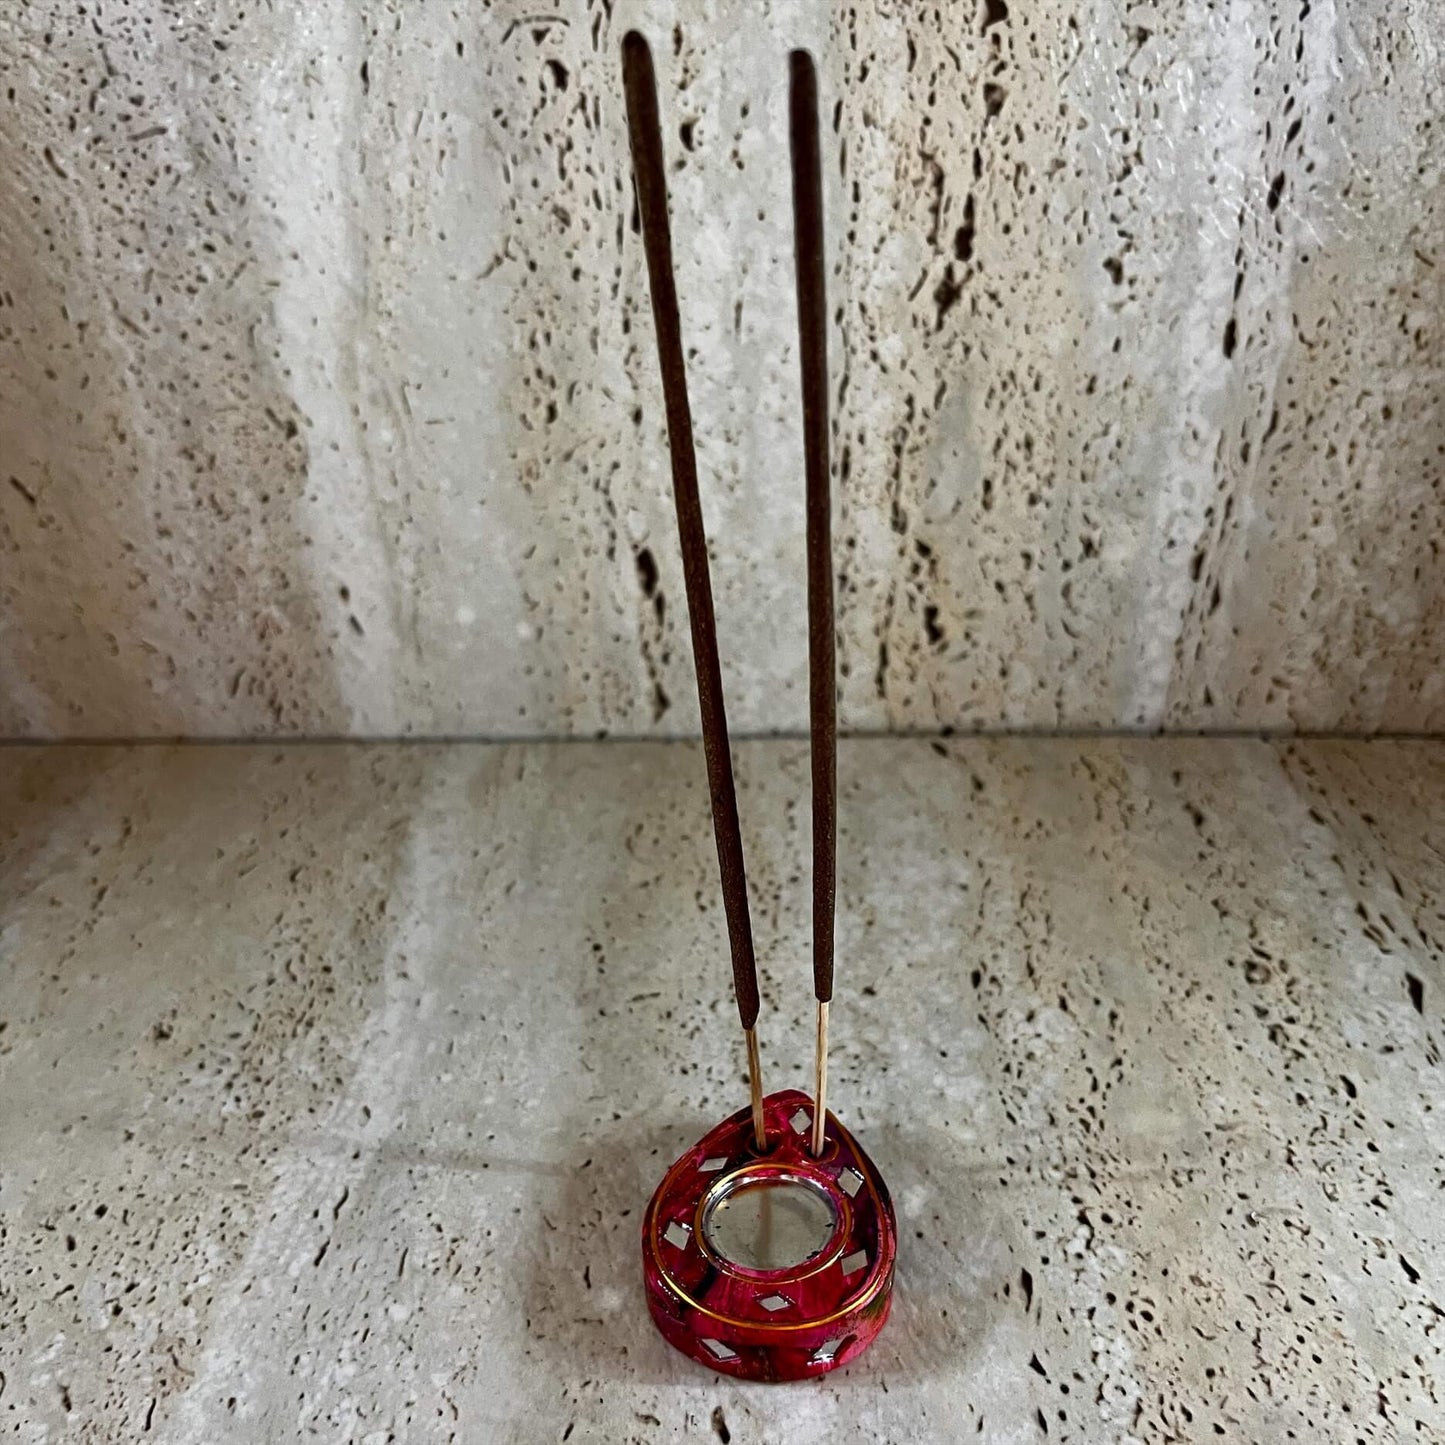 Incense and Cone Holder Mirror Resin Design